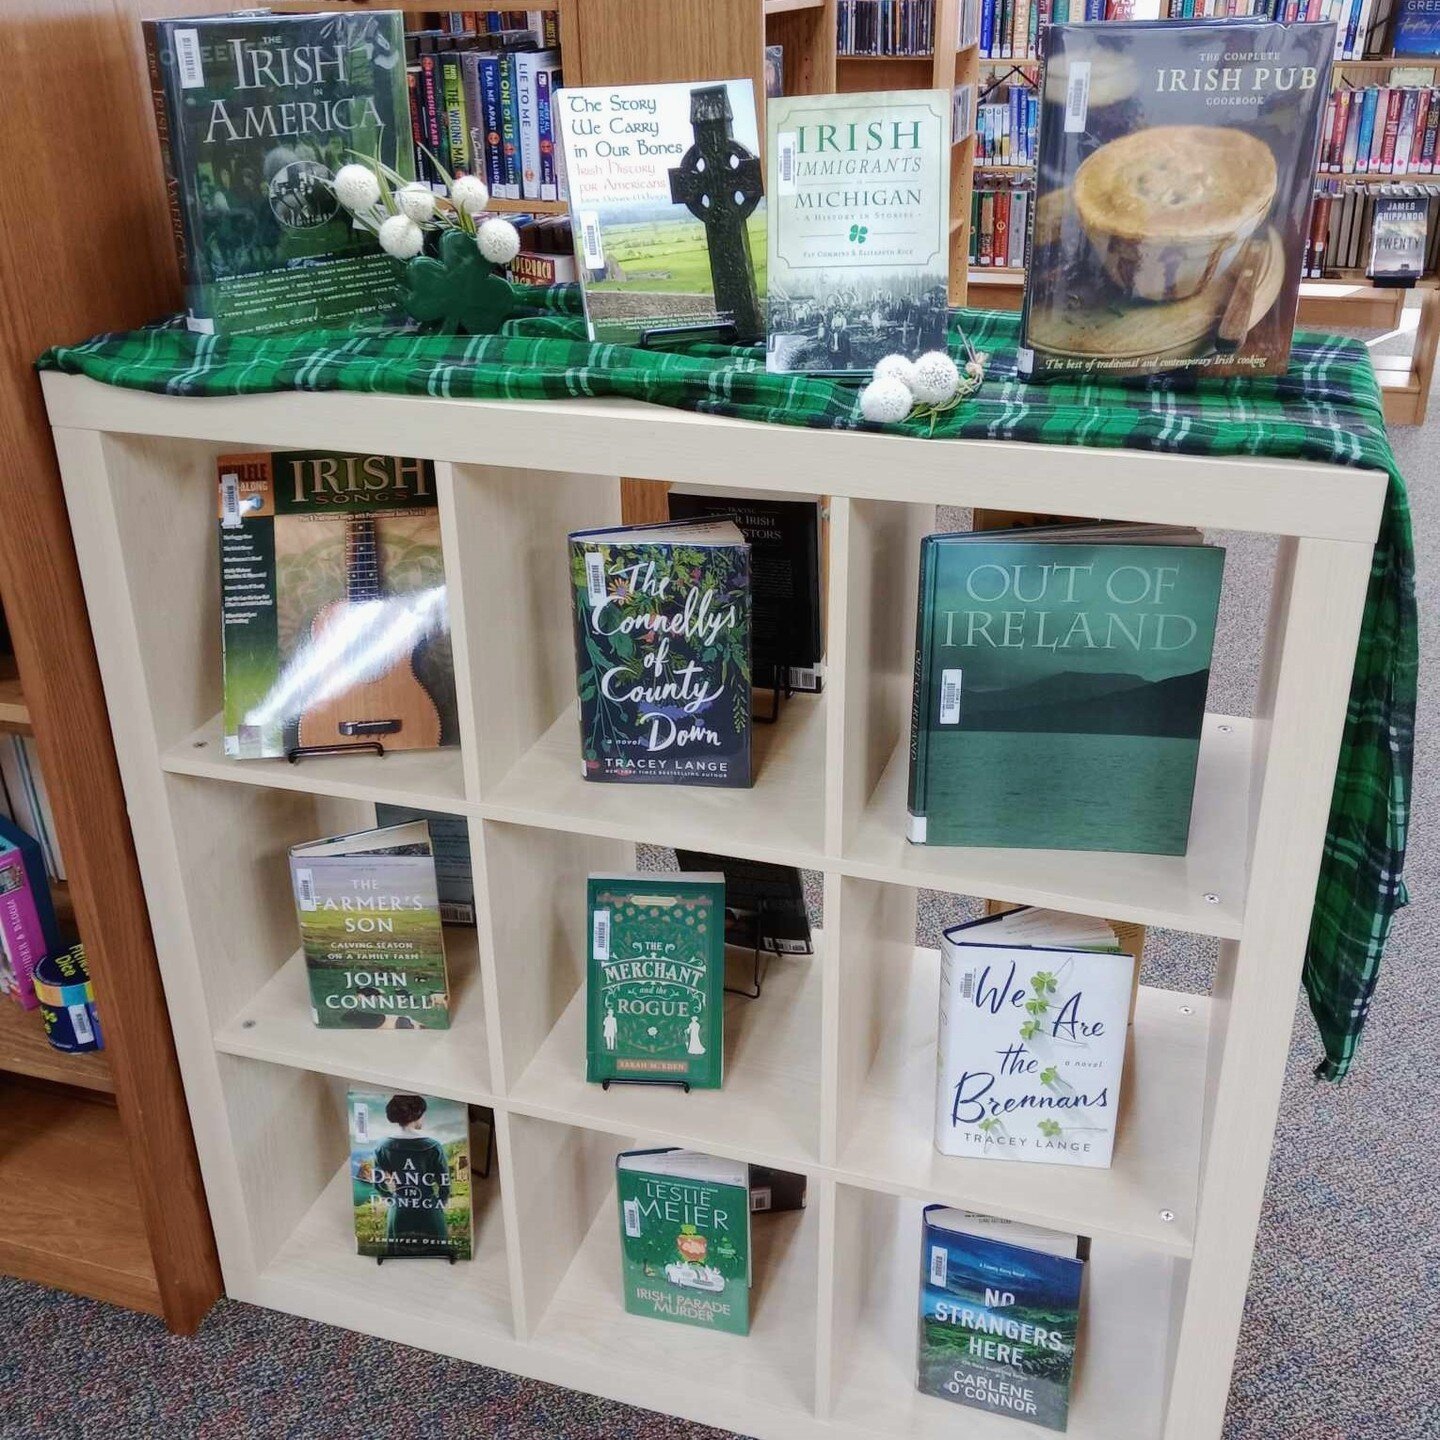 St Patrick's Day is on the way! 🍀

#stpatricksday #luckoftheirish #ireland #read #reading #books #book #shelfie #library #librarybooks #libraries #bookdisplay #fiction #nonfiction #michiganlibrary #librariesofmichigan